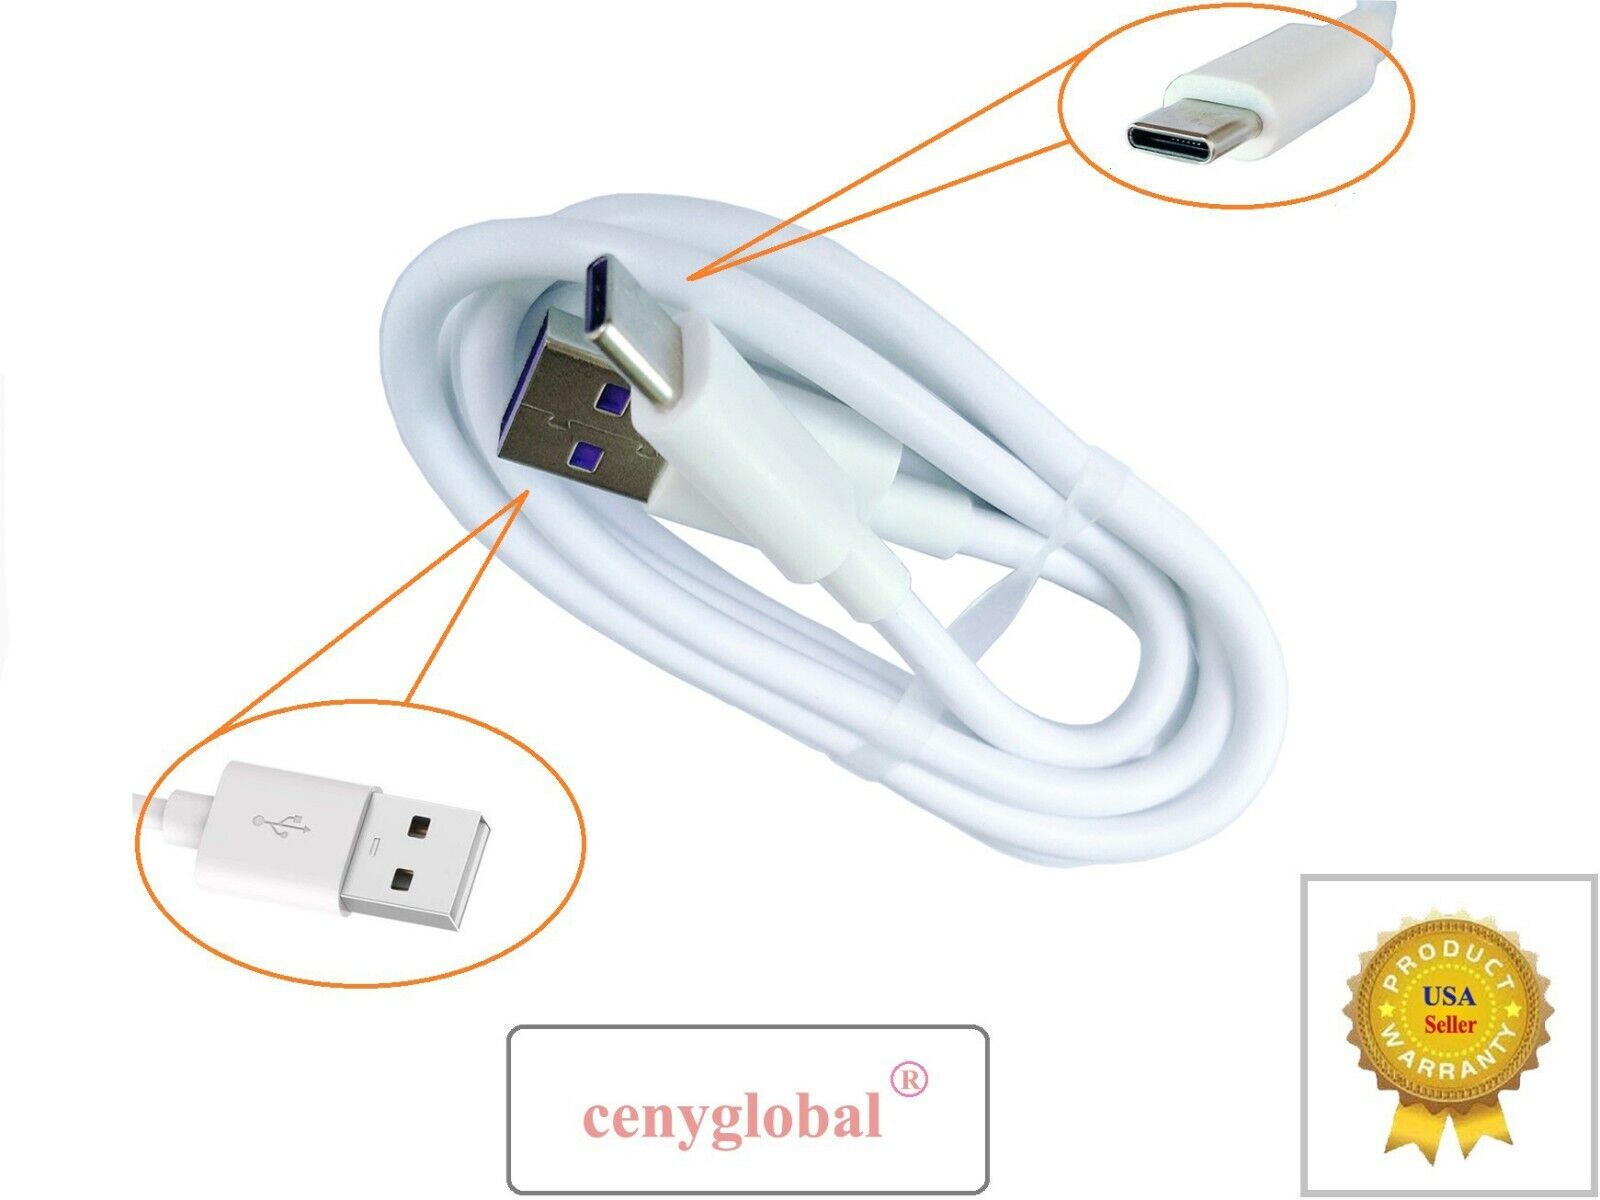 USB Cord For Portable Hanging Neck Fan Cooling Air Cooler Electric Conditioner